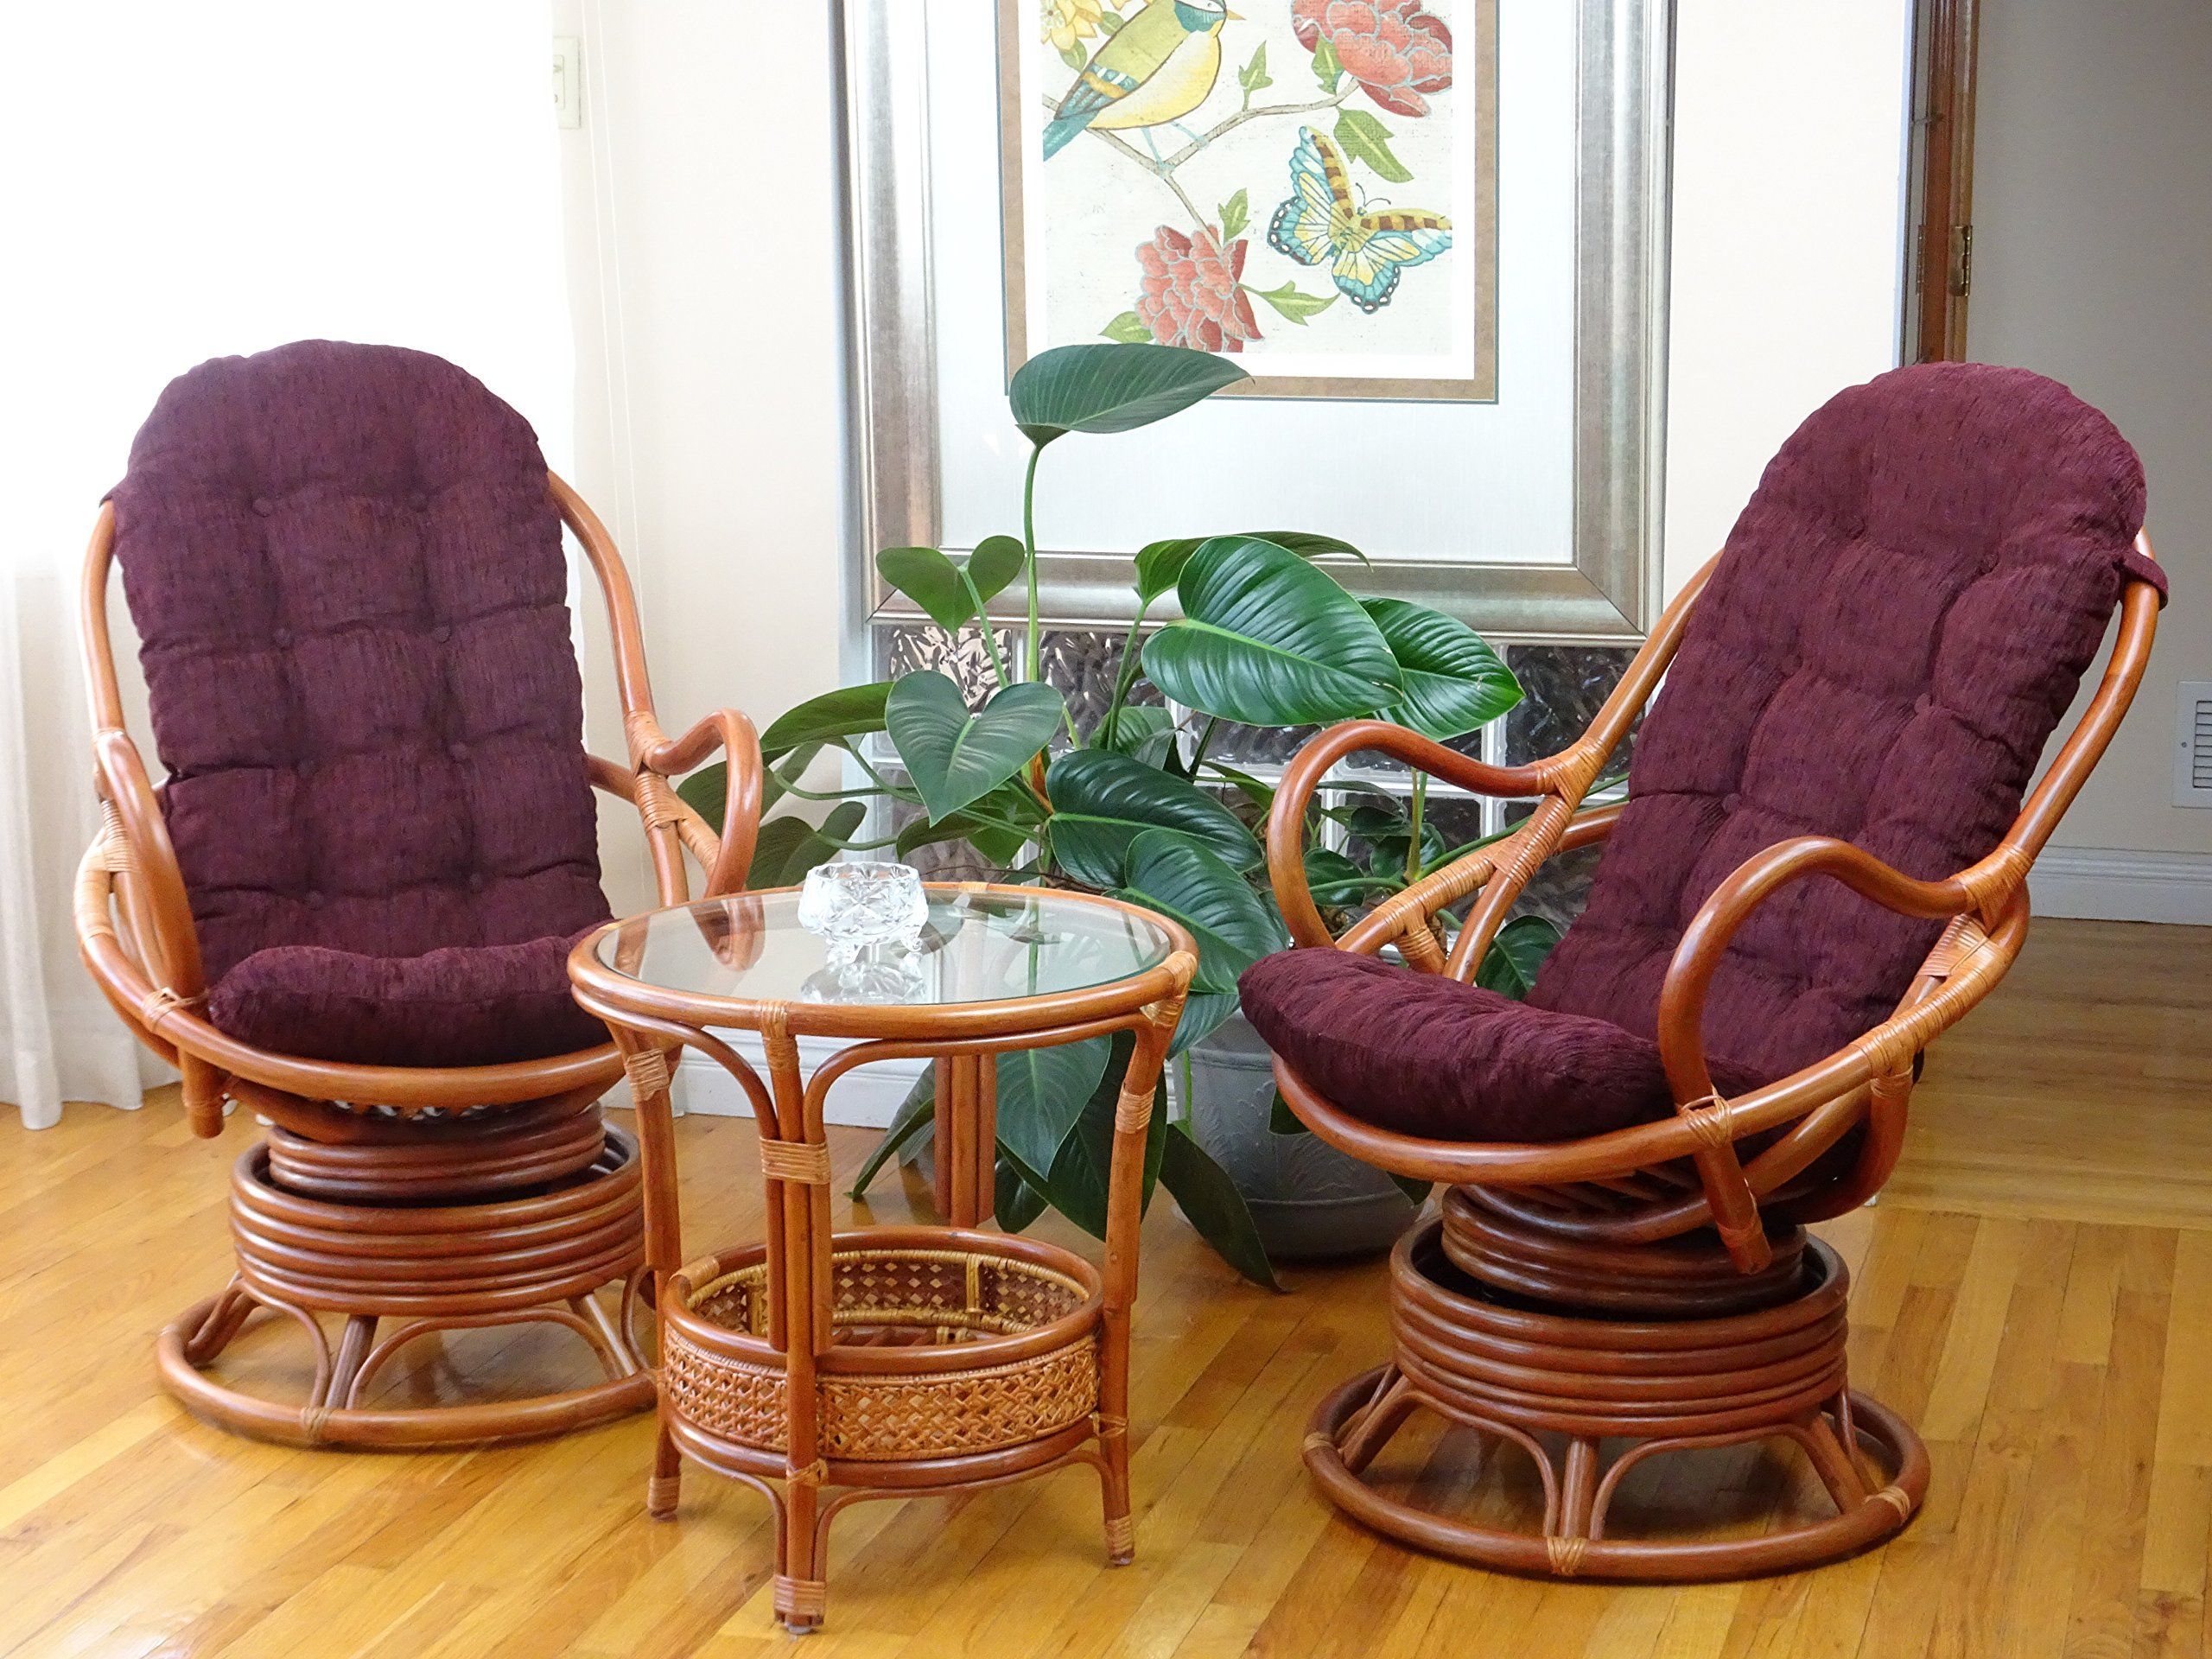 Lounge Swivel Rocking Java Chair Rattan Wicker Handmade W/Dark Brown Intended For Dark Natural Rocking Chairs (View 13 of 15)